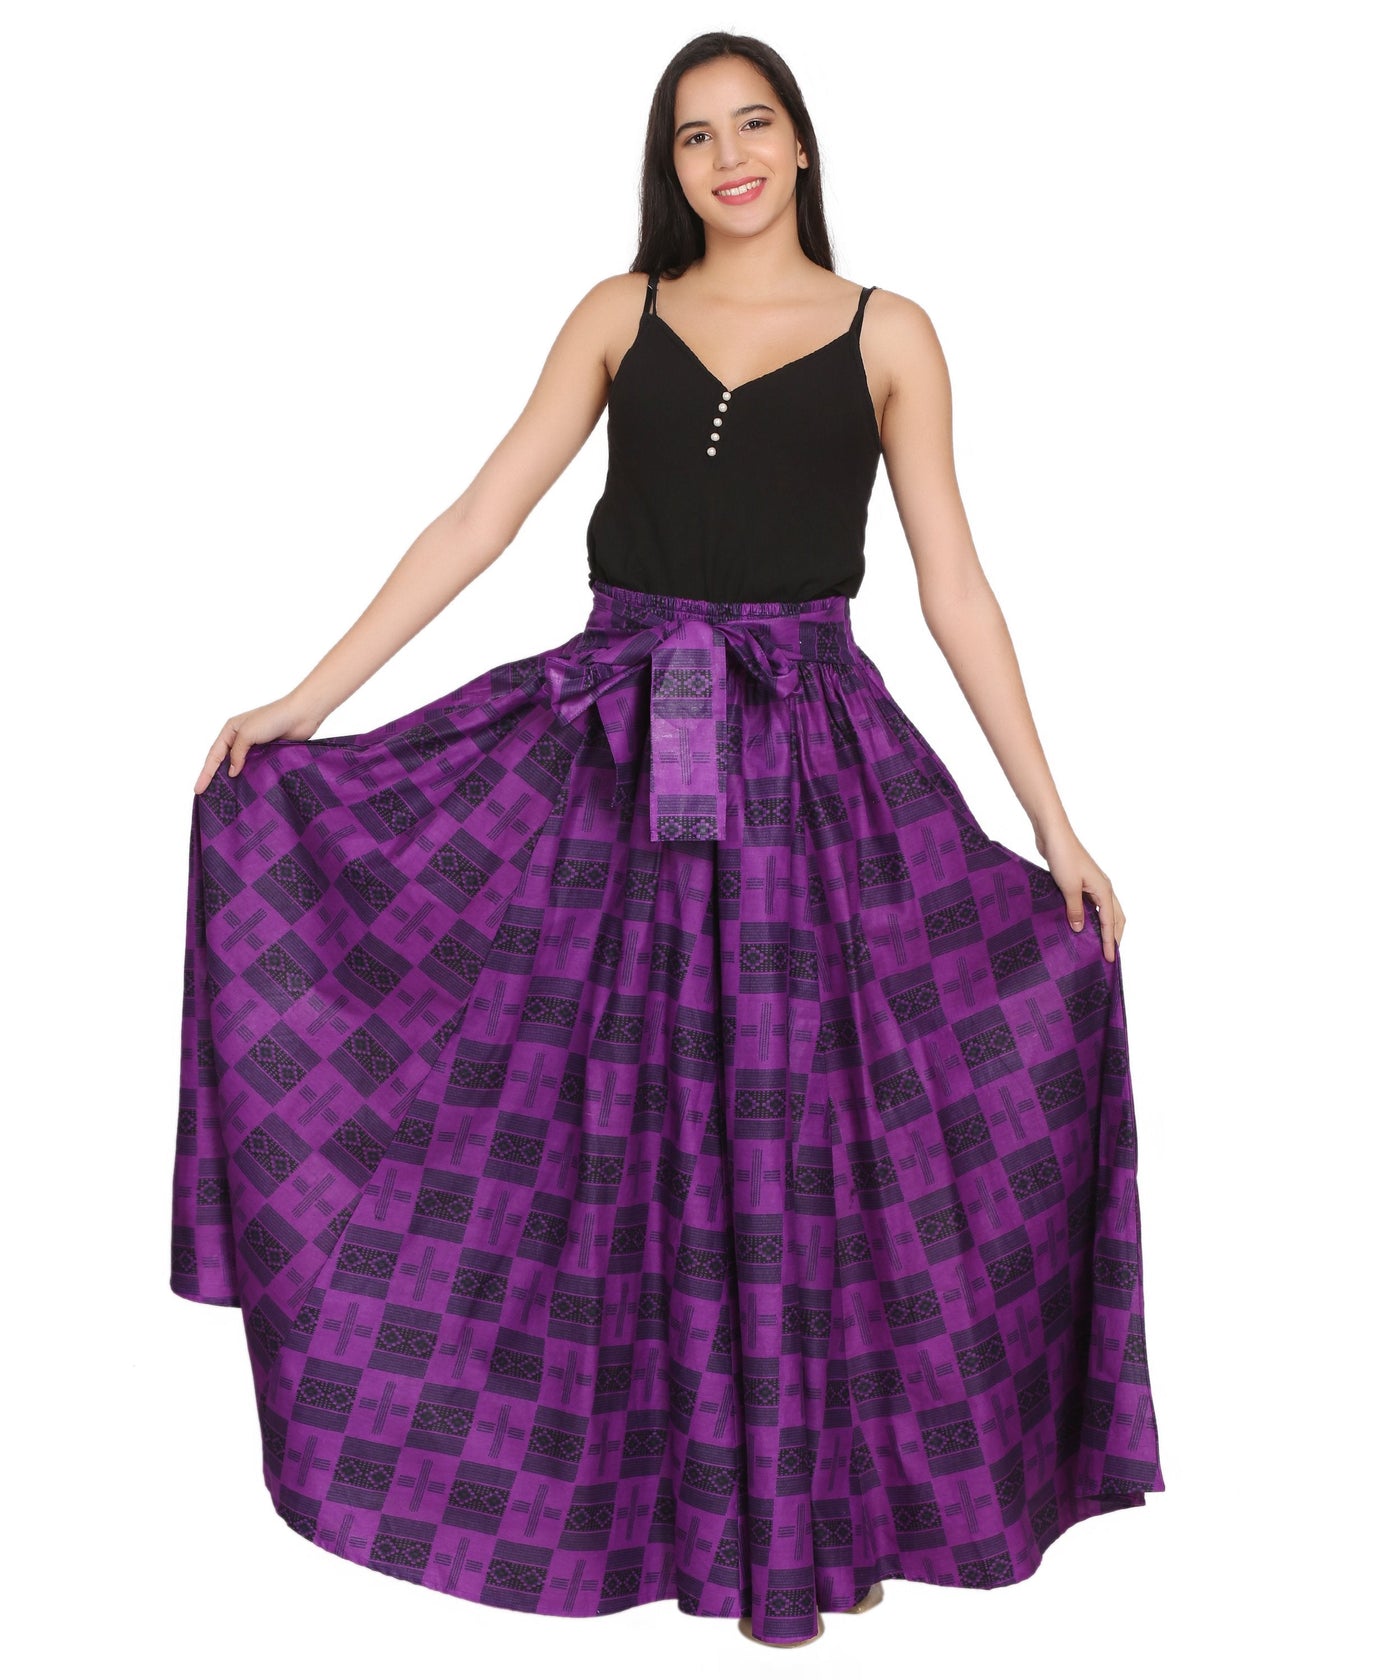 African Print Wax Print Skirt One Size Fits Most Headwrap Included Elastic Waist Pockets 16317-612